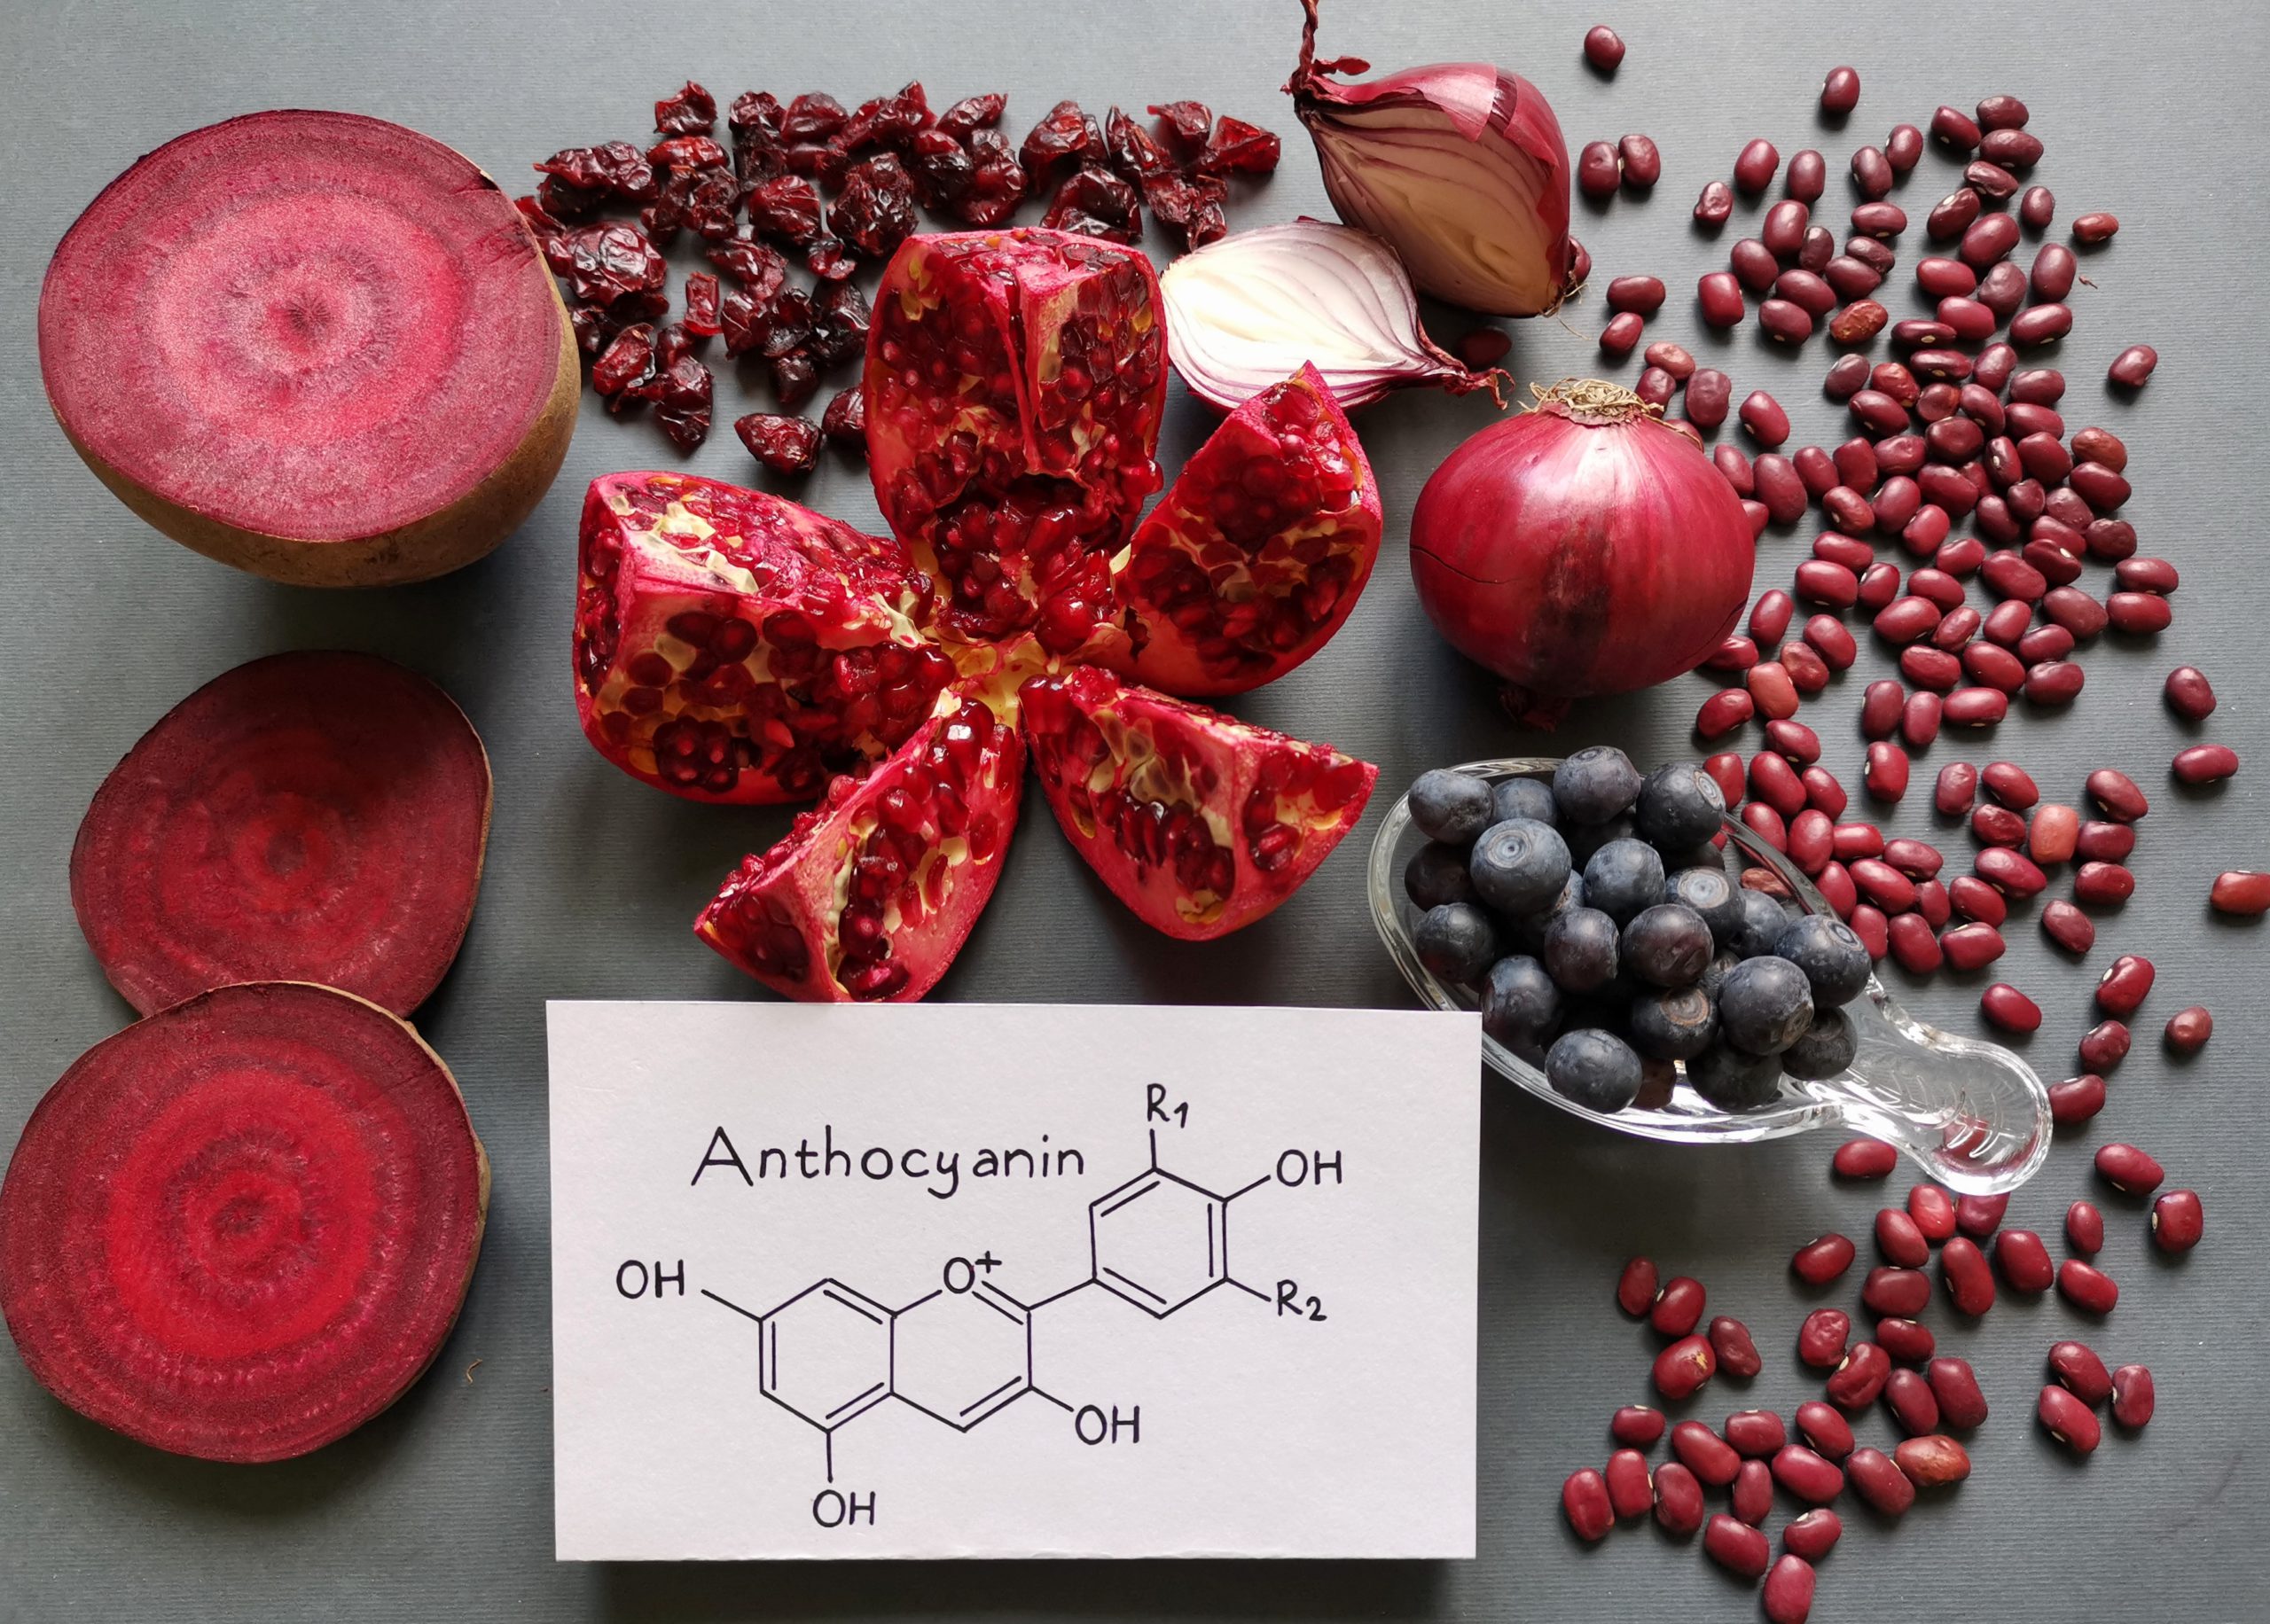 Healthy food rich in anthocyanins with general structural chemical formula of anthocyanins. Foods containing anthocyanins and antioxidants: beetroot, blueberry, cranberry, red onion, pomegranate, bean